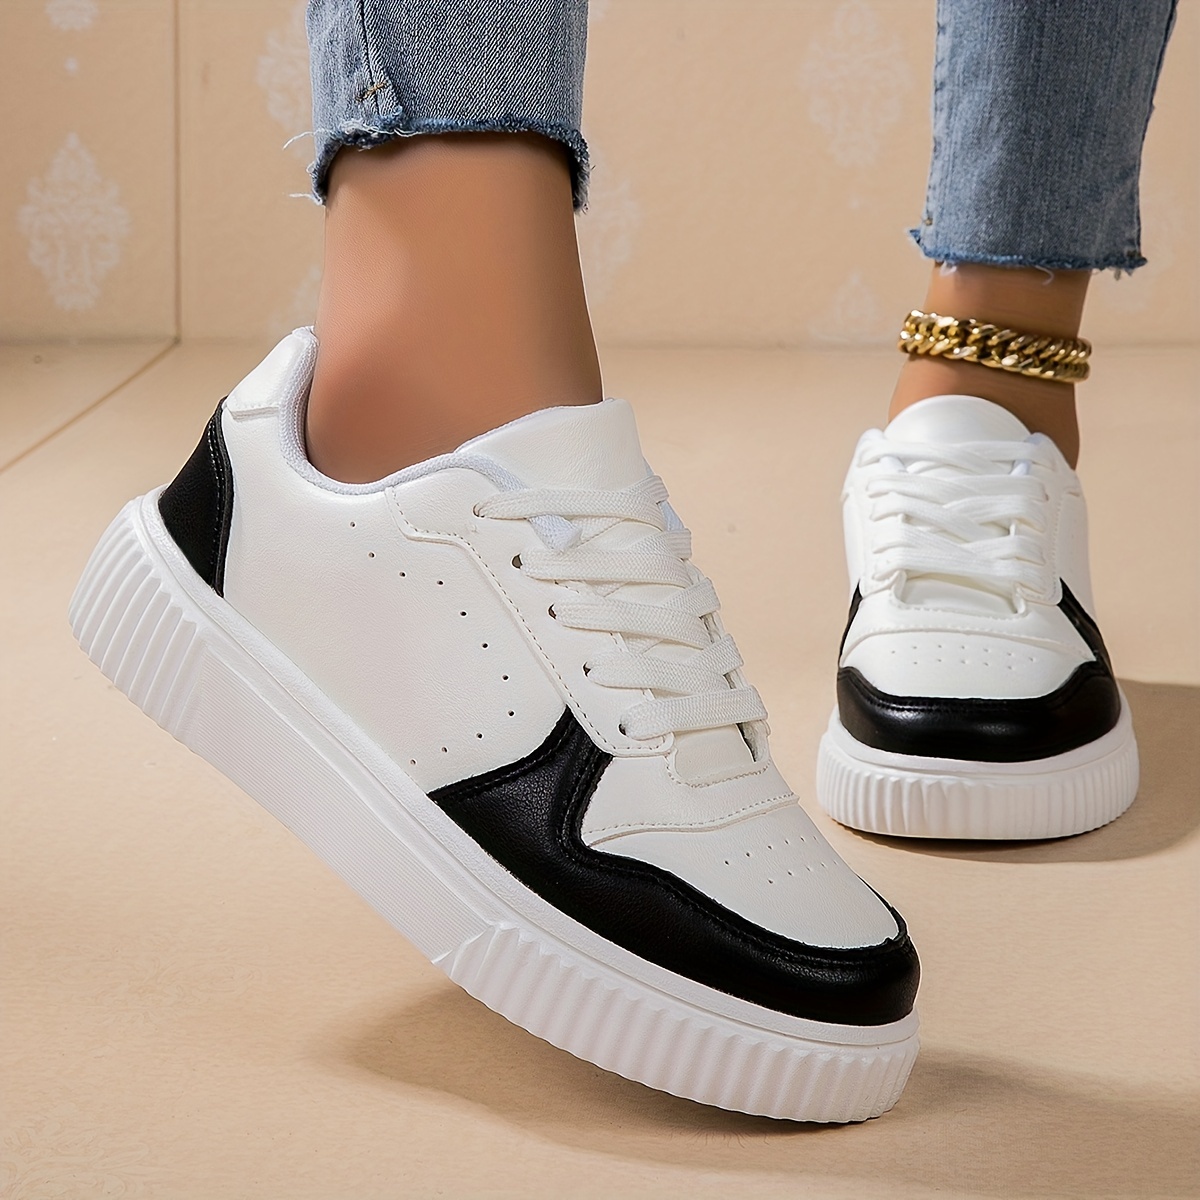 womens solid color sneakers casual lightweight low top skate shoes comfortable white lace up shoes details 6